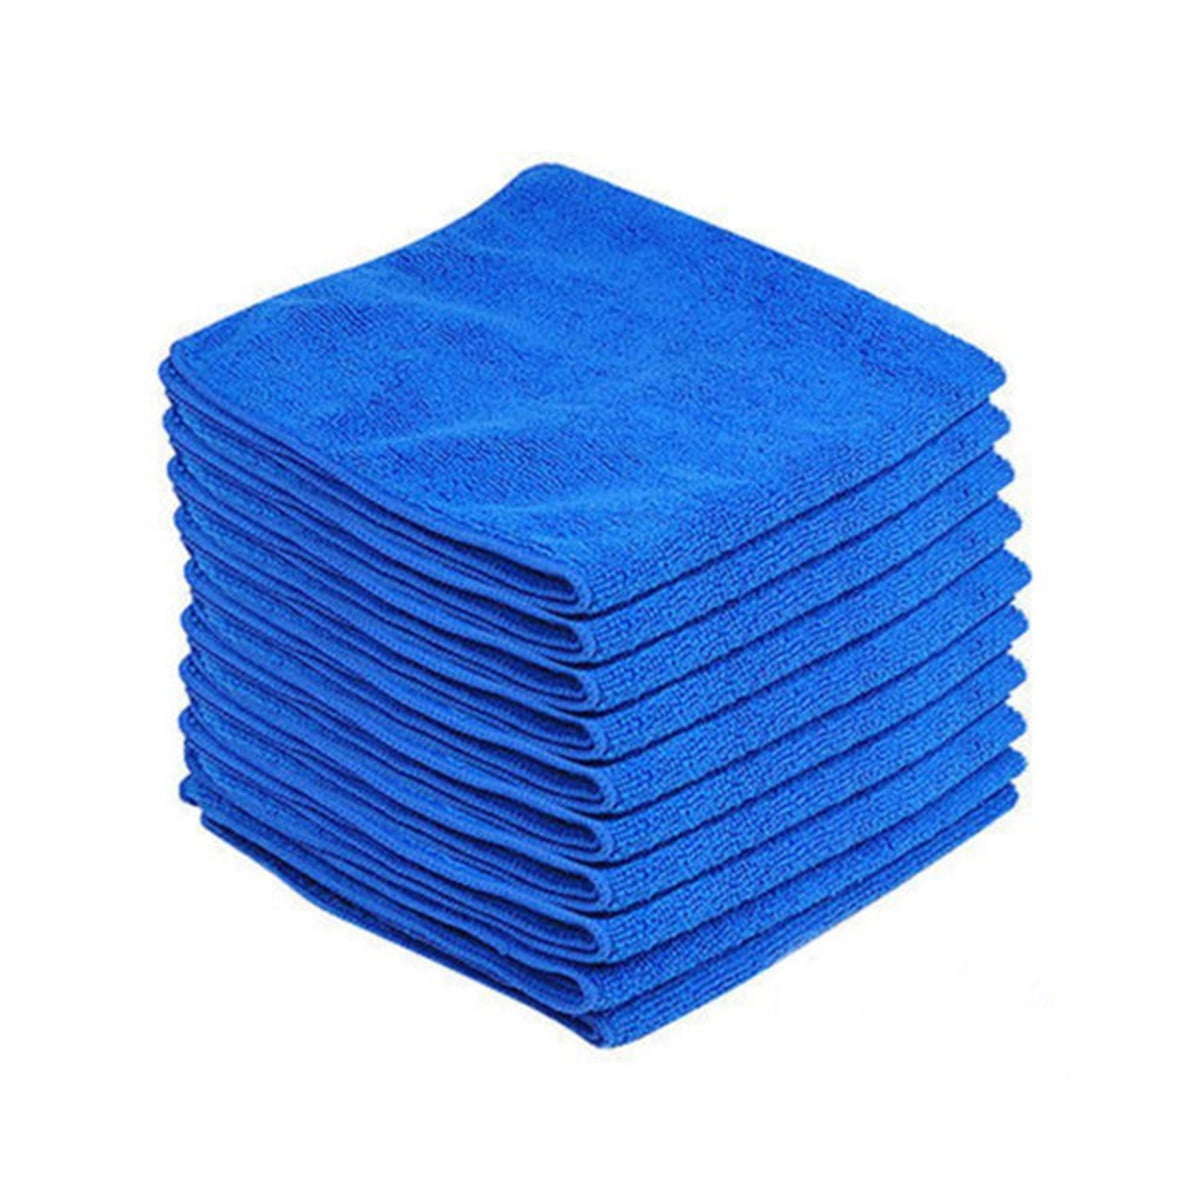 70pc Microfiber Cleaning Cloth No-Scratch Rag Polishing Detailing Kitchen Towels 